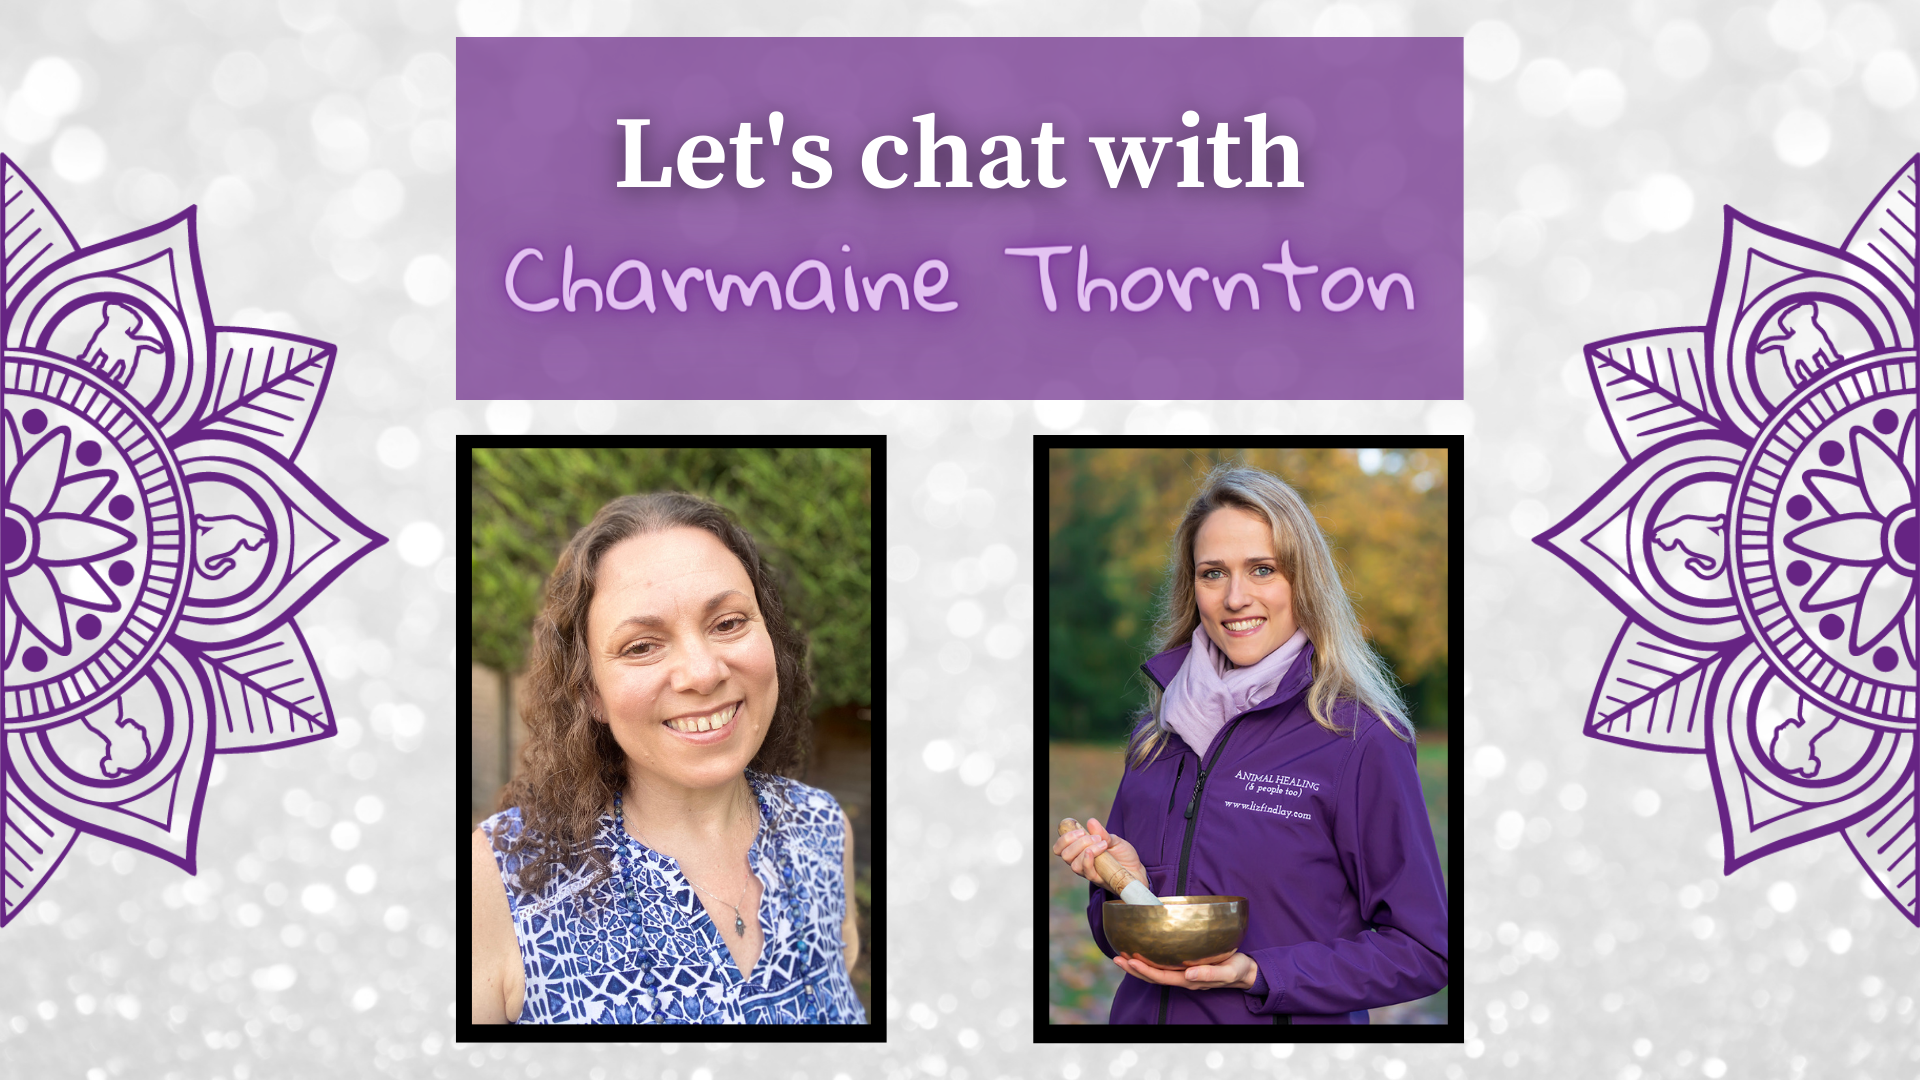 Managing Your Workload with Charmaine Thornton